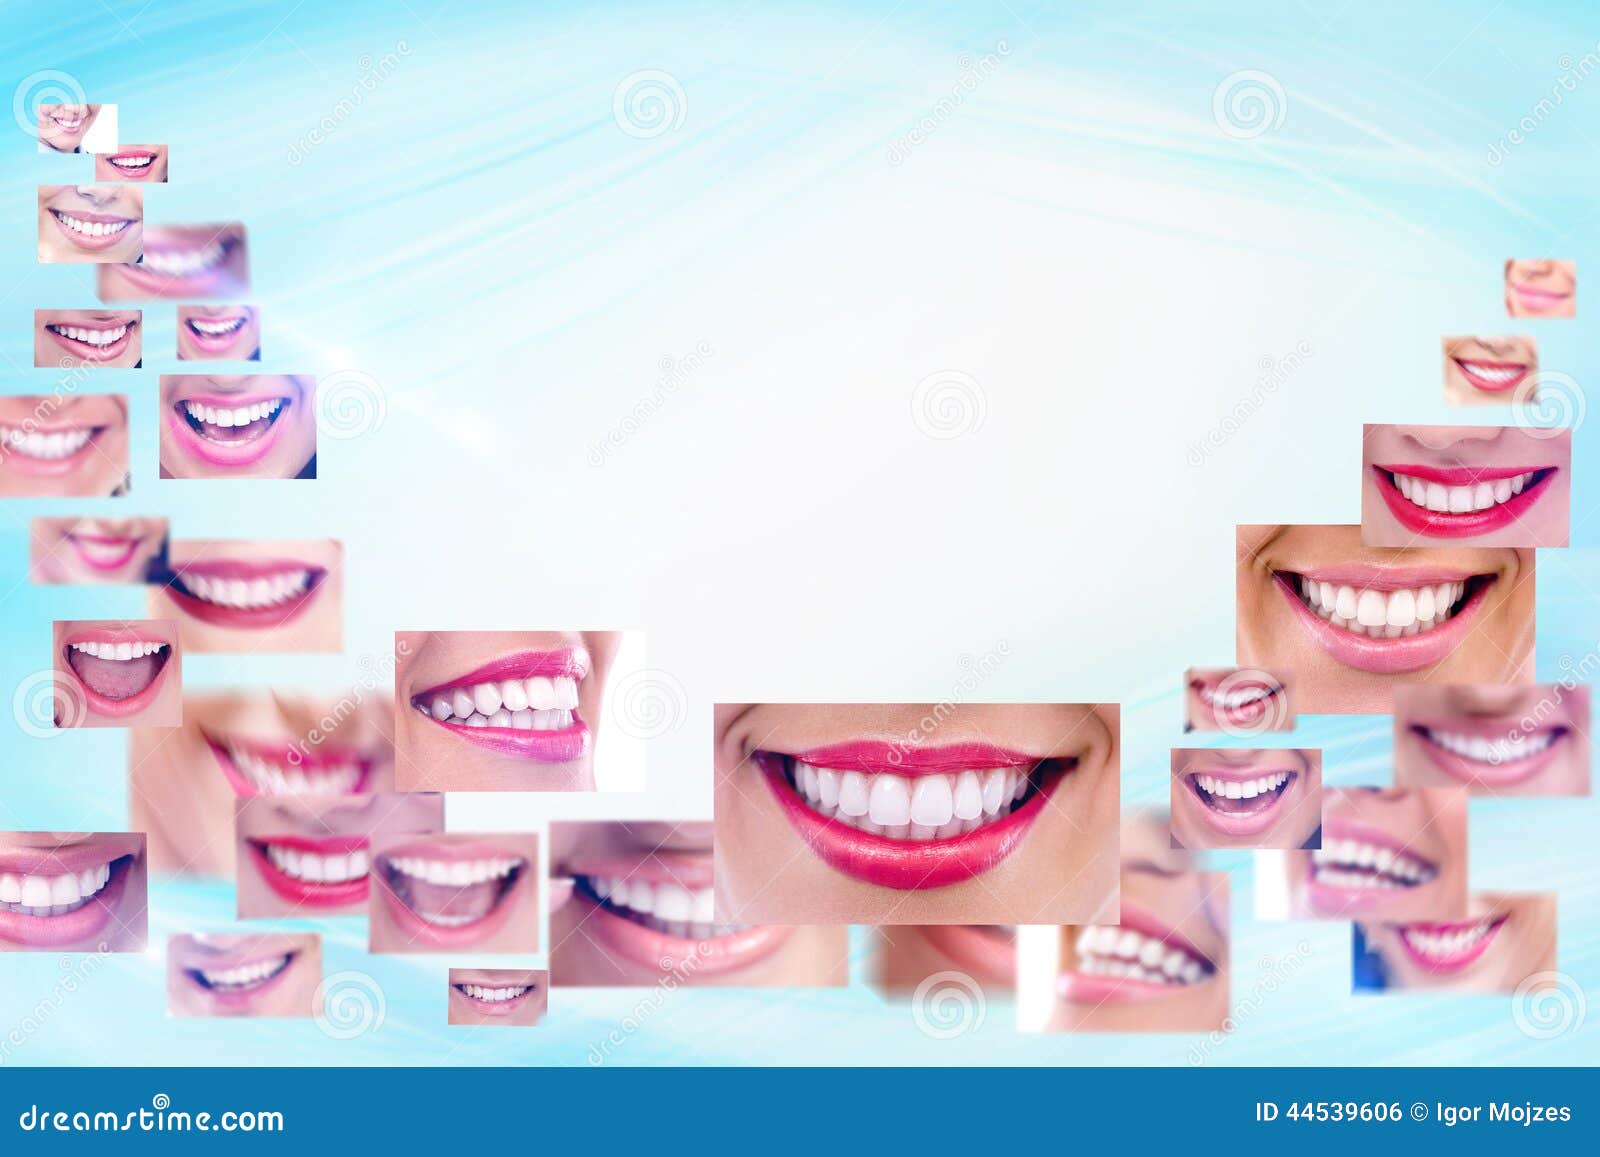 smile collage